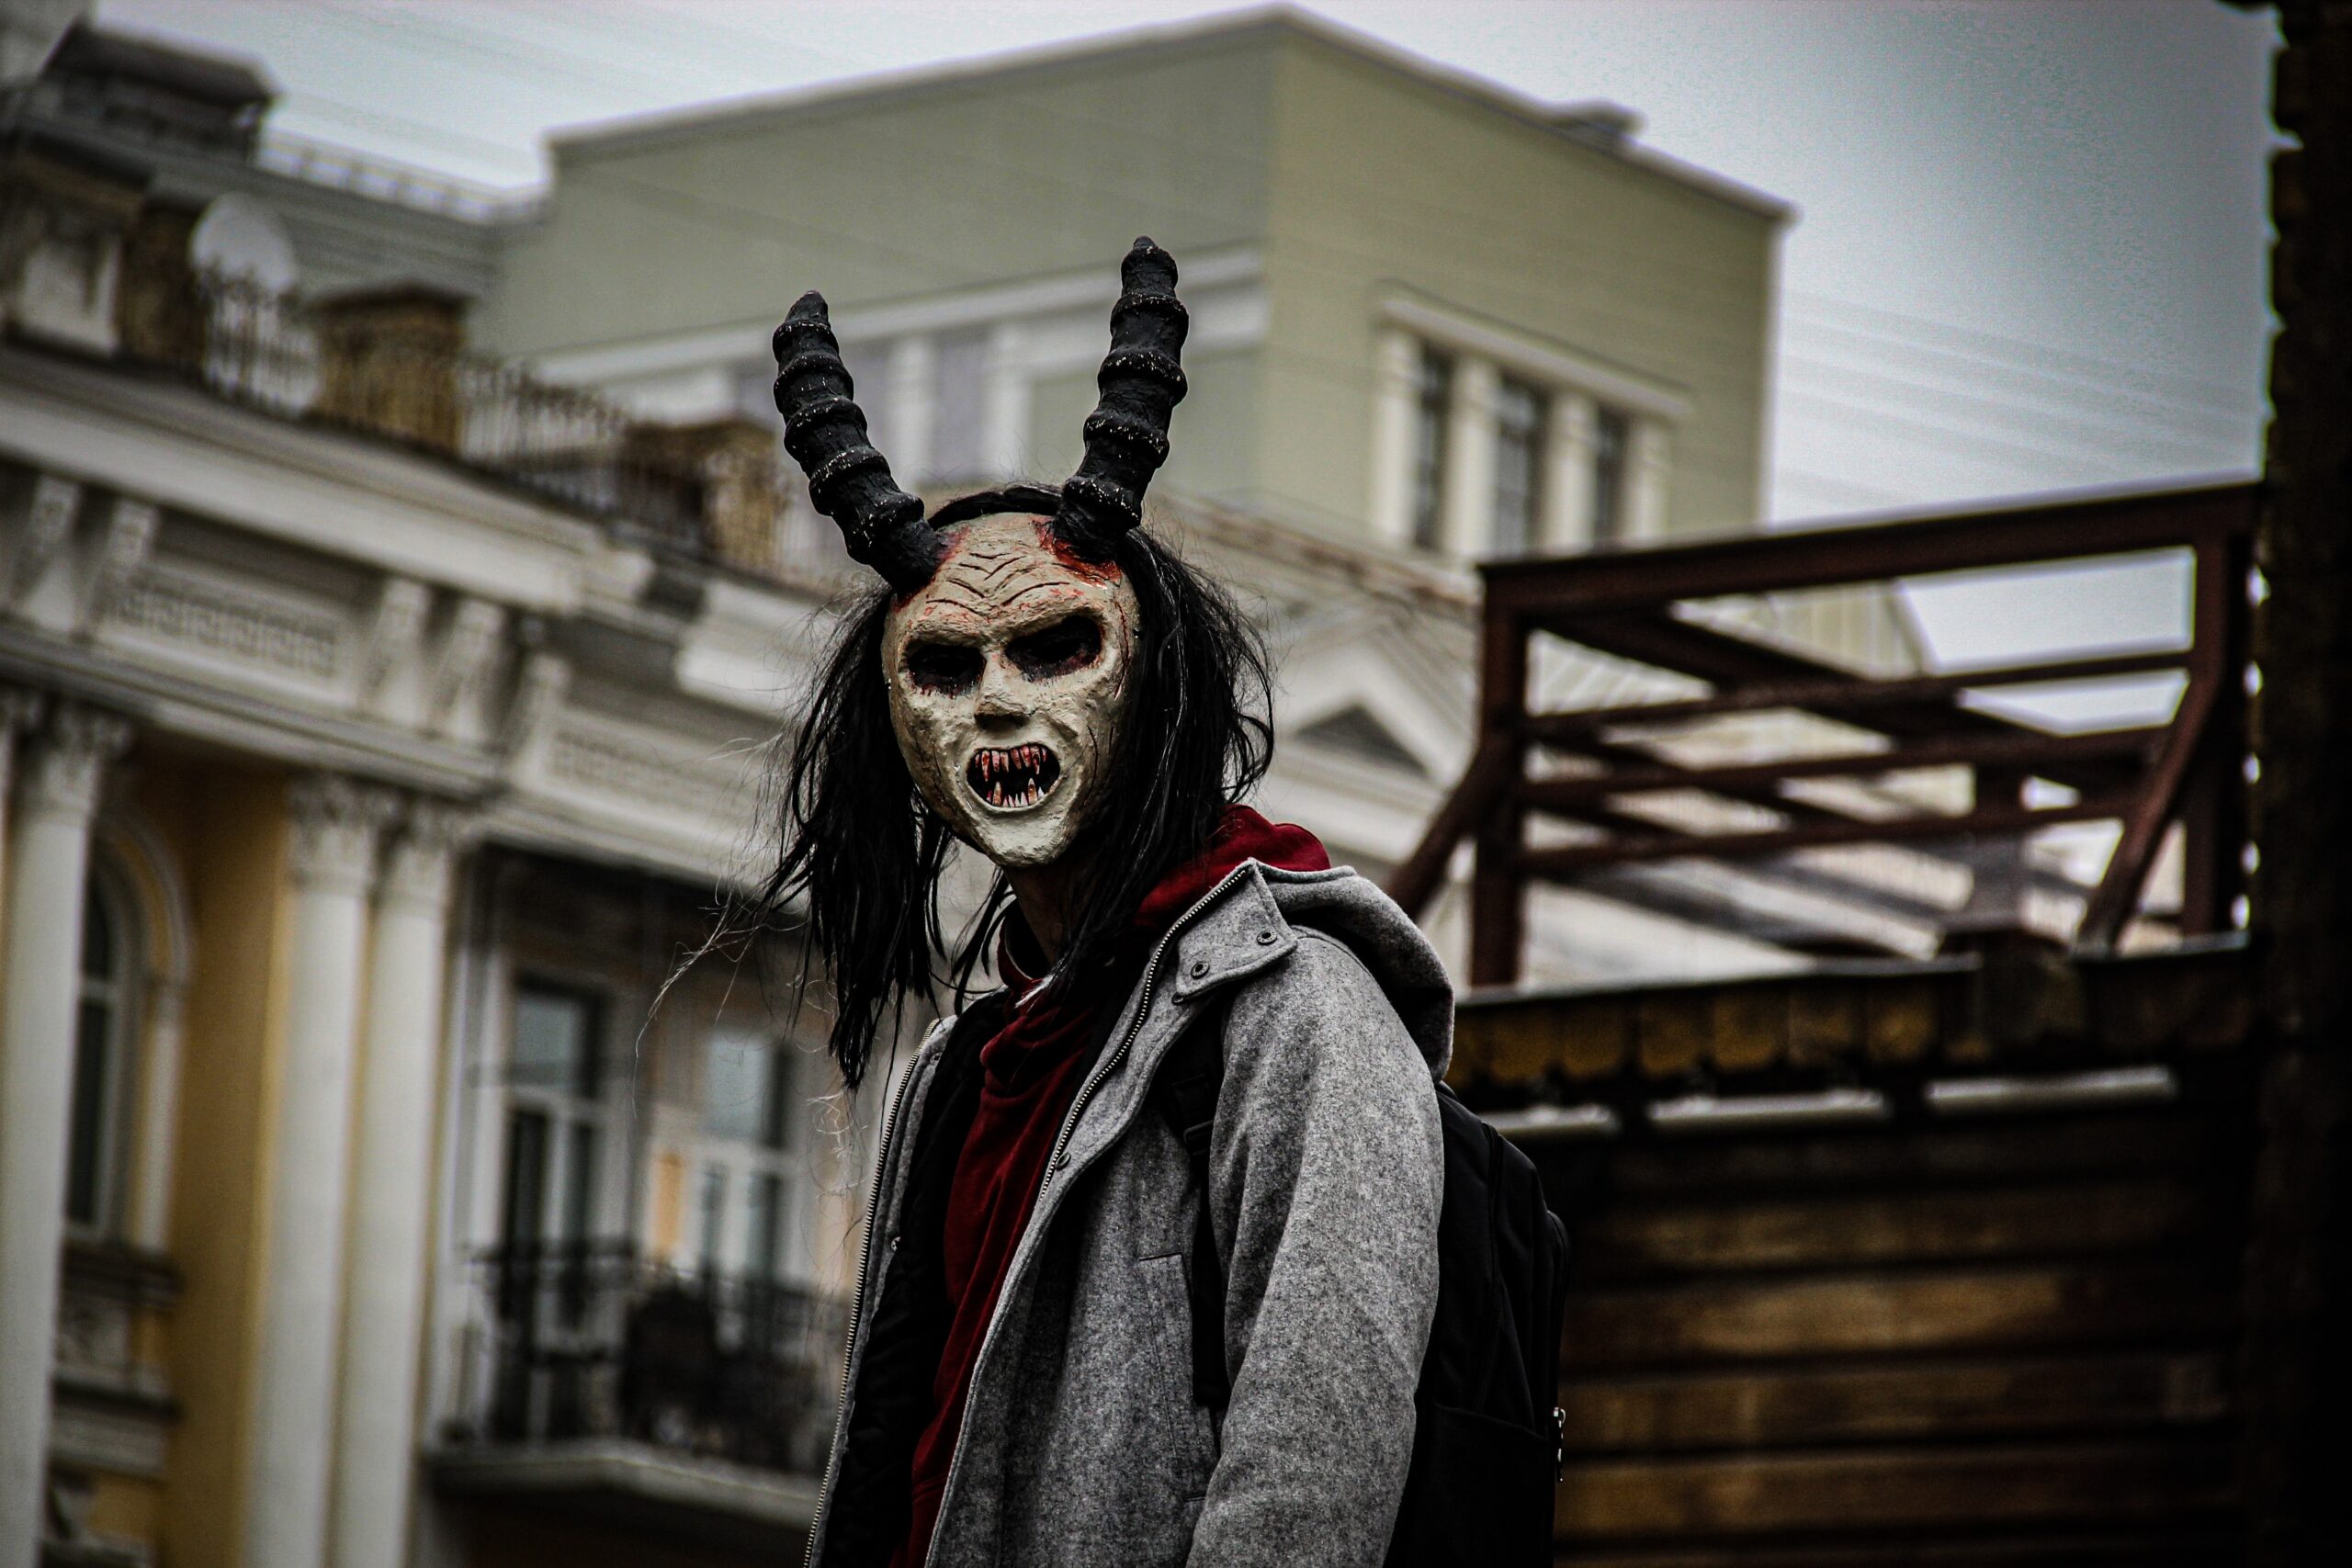 Long haired person in devil mask, amidst suburban setting in Ukraine.